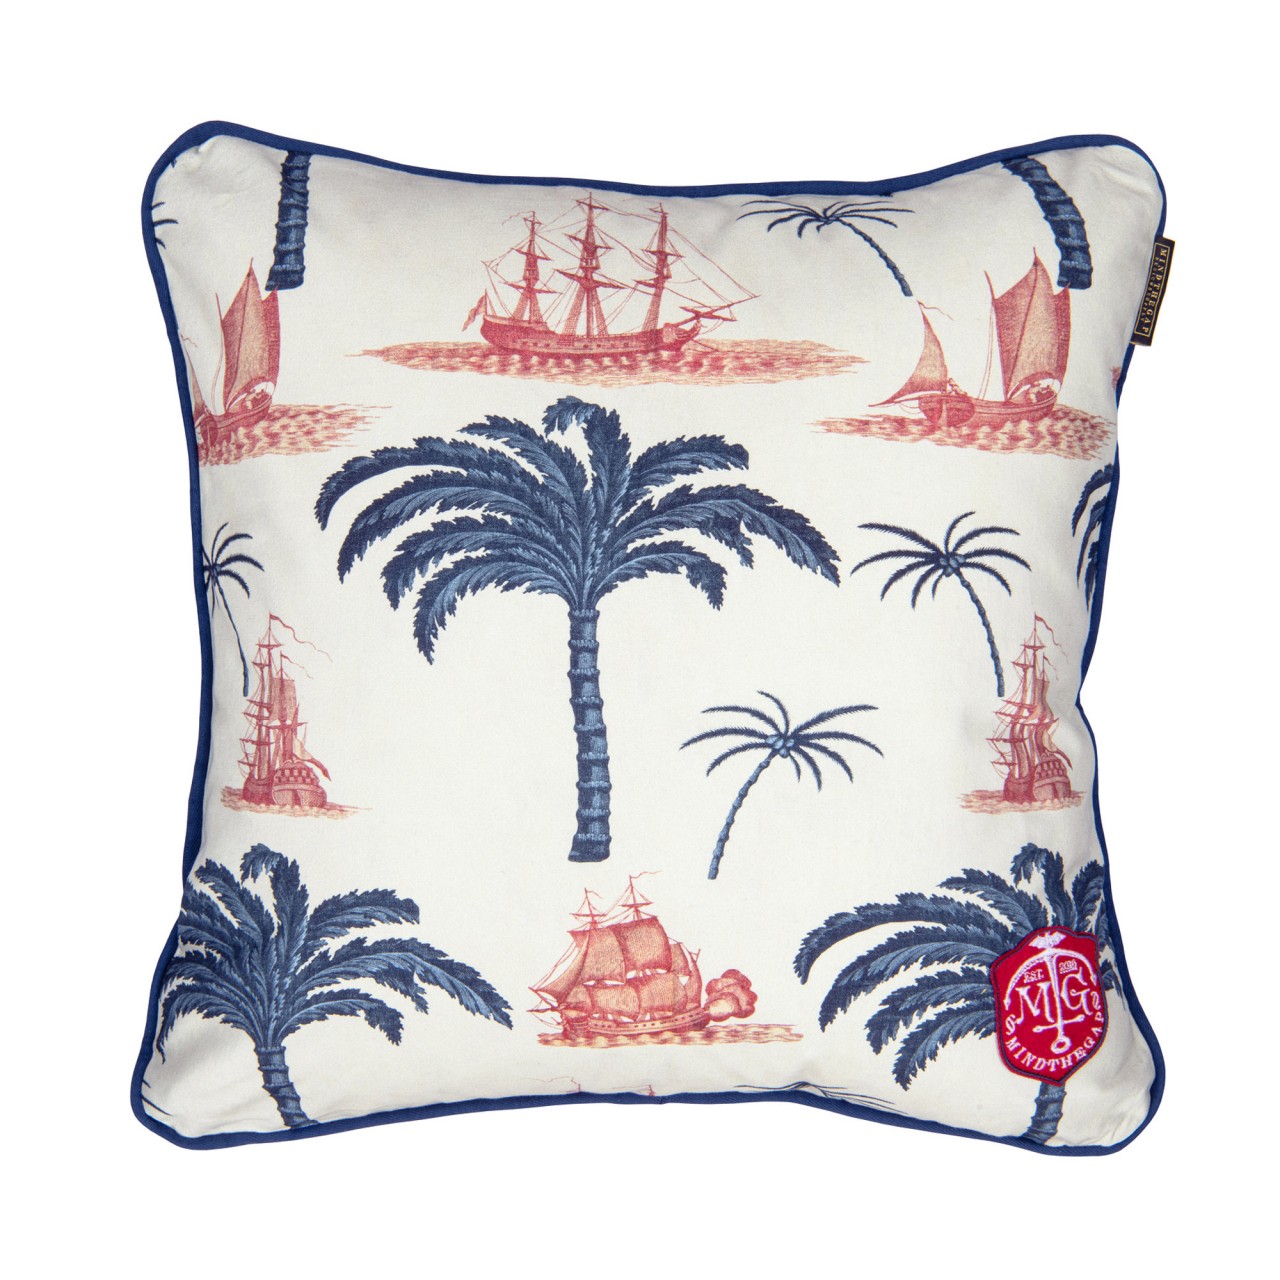 images/productimages/small/aegean-outdoor-cushion-50x50cm-front-lc40123-1.jpg